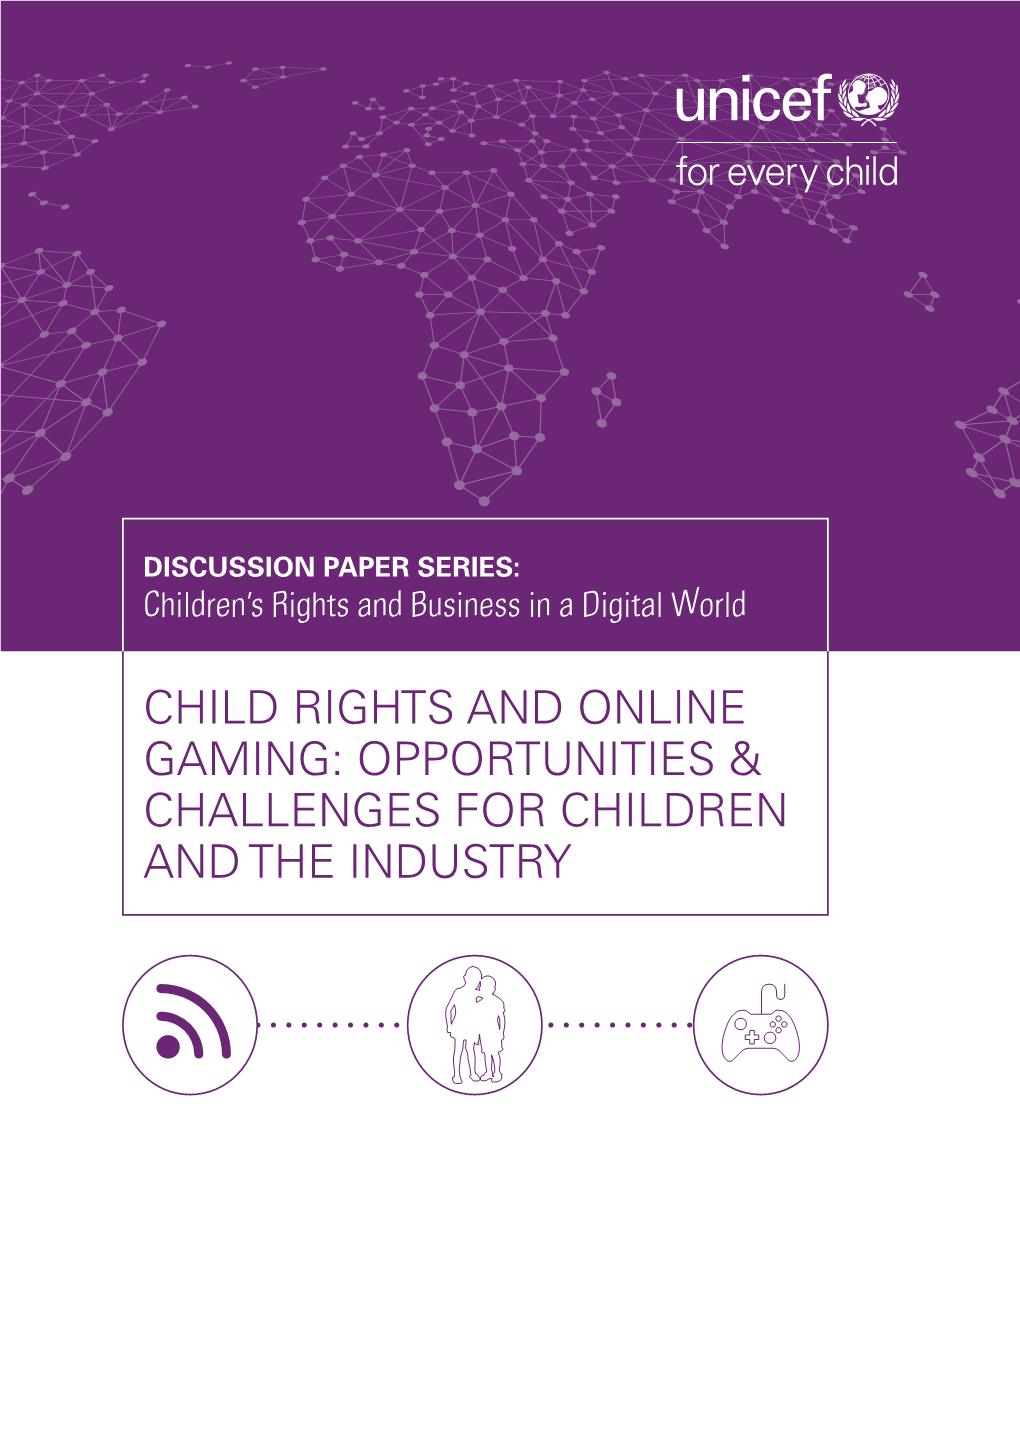 Child Rights and Online Gaming: Opportunities & Challenges For